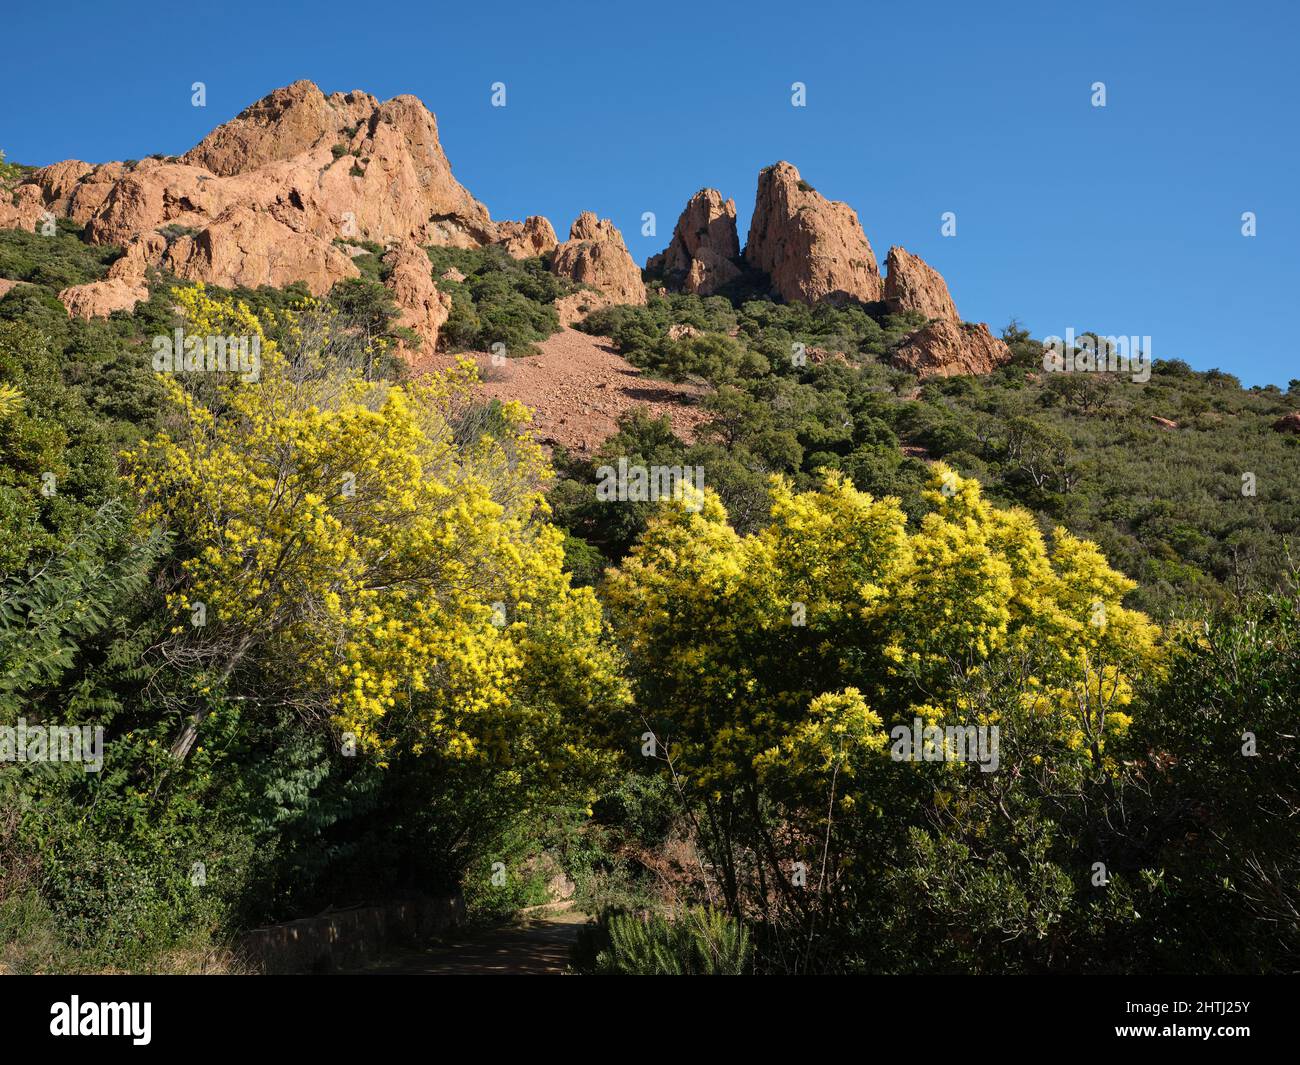 Mimosa in full bloom at the foot of red volcanic pinnacles. Saint-Raphaël, Var, Provence-Alpes-Côte d'Azur, France. Stock Photo